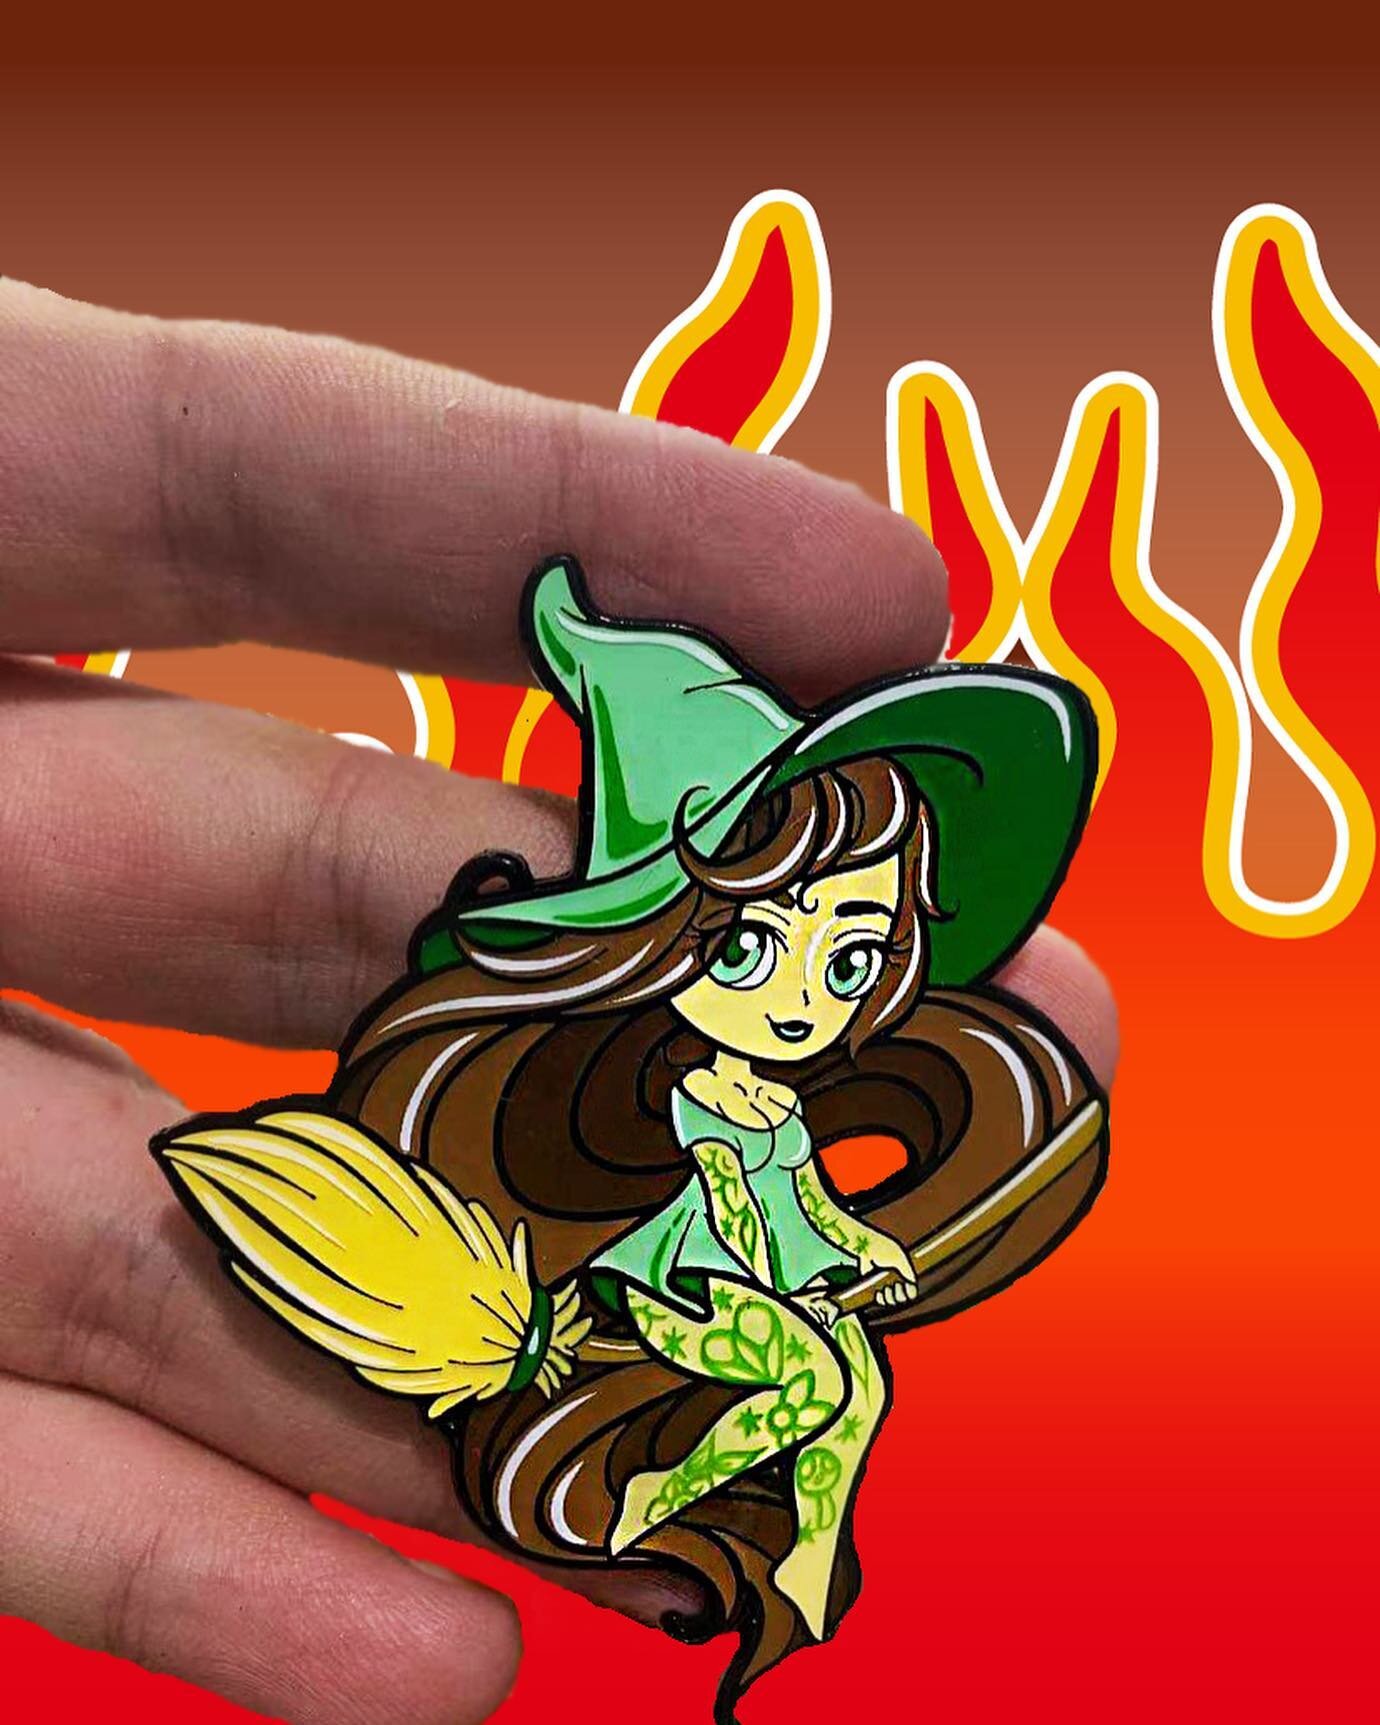 ✨✨ oooooh oooh witchy woman, see how high she flies✨✨ 

Just a quick appreciation for one  of my favorite sets of pins I did for one of my talented clients @pinchanted_arts 💕

These are soft enamel sprayed metal with an epoxy and lots of screen prin